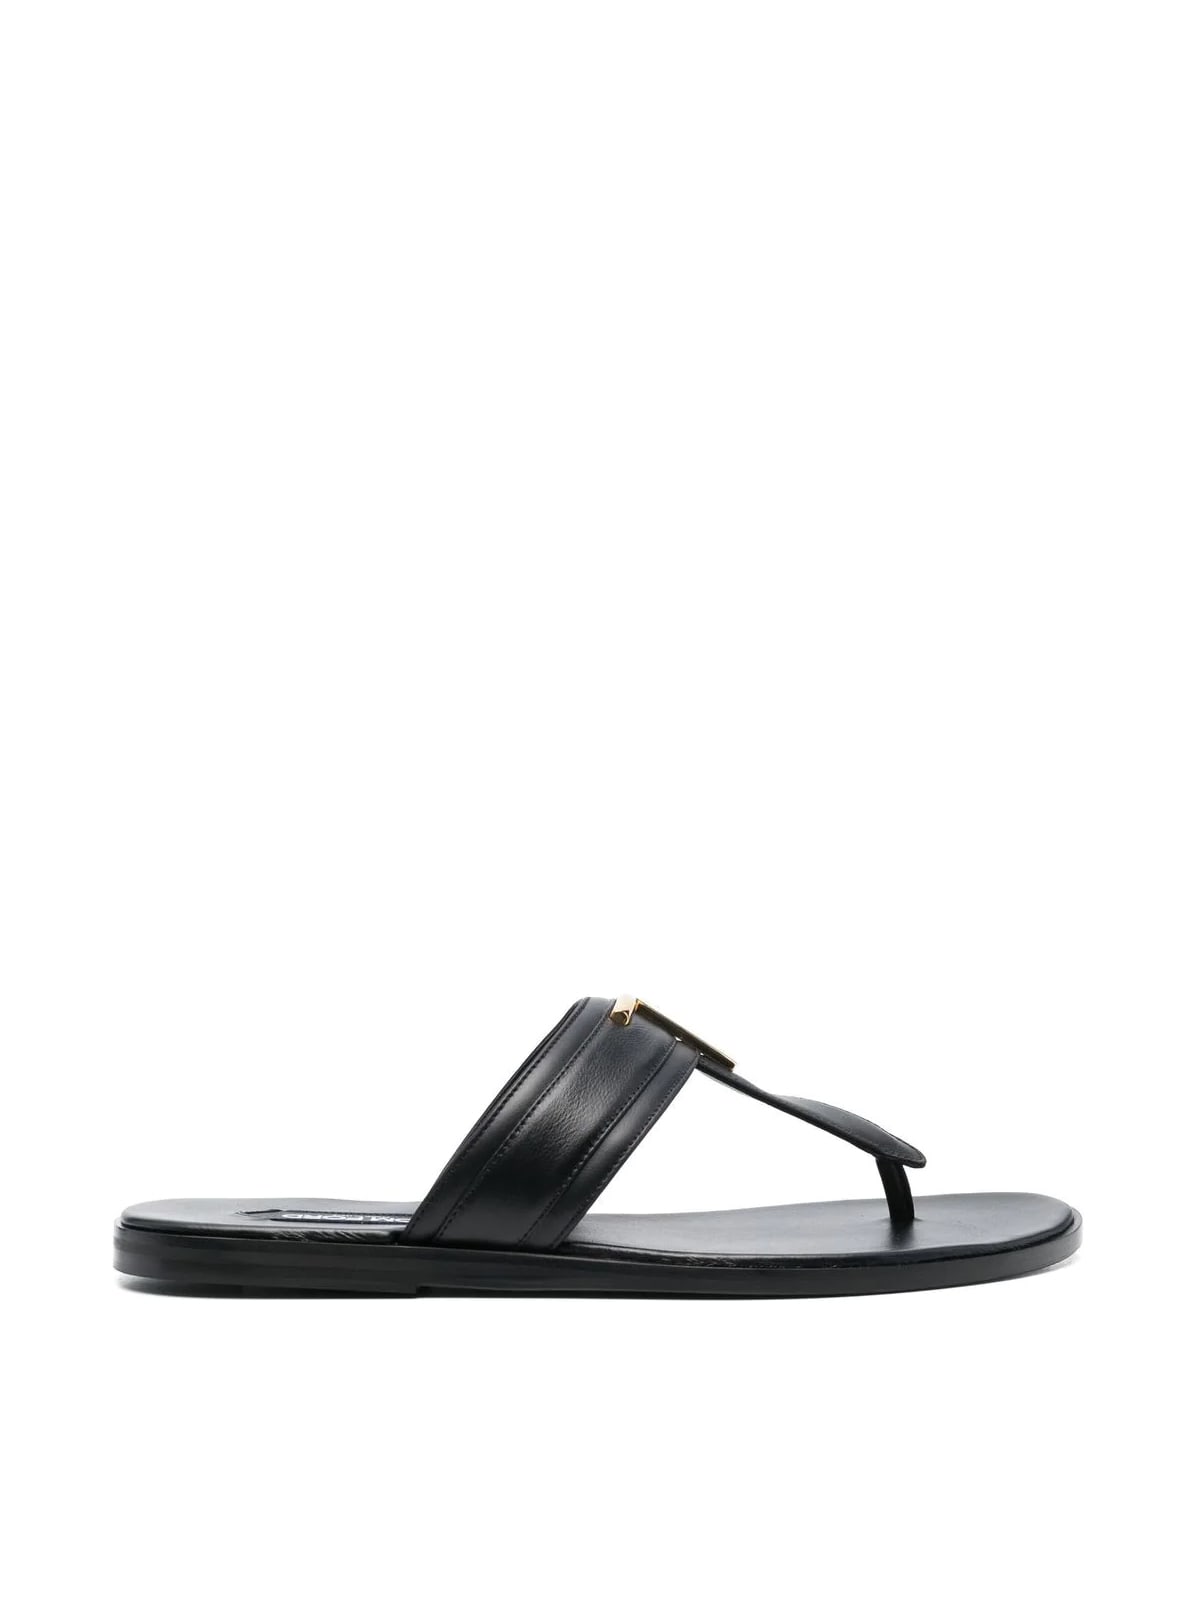 TOM FORD SMOOTH LEATHER SANDALS